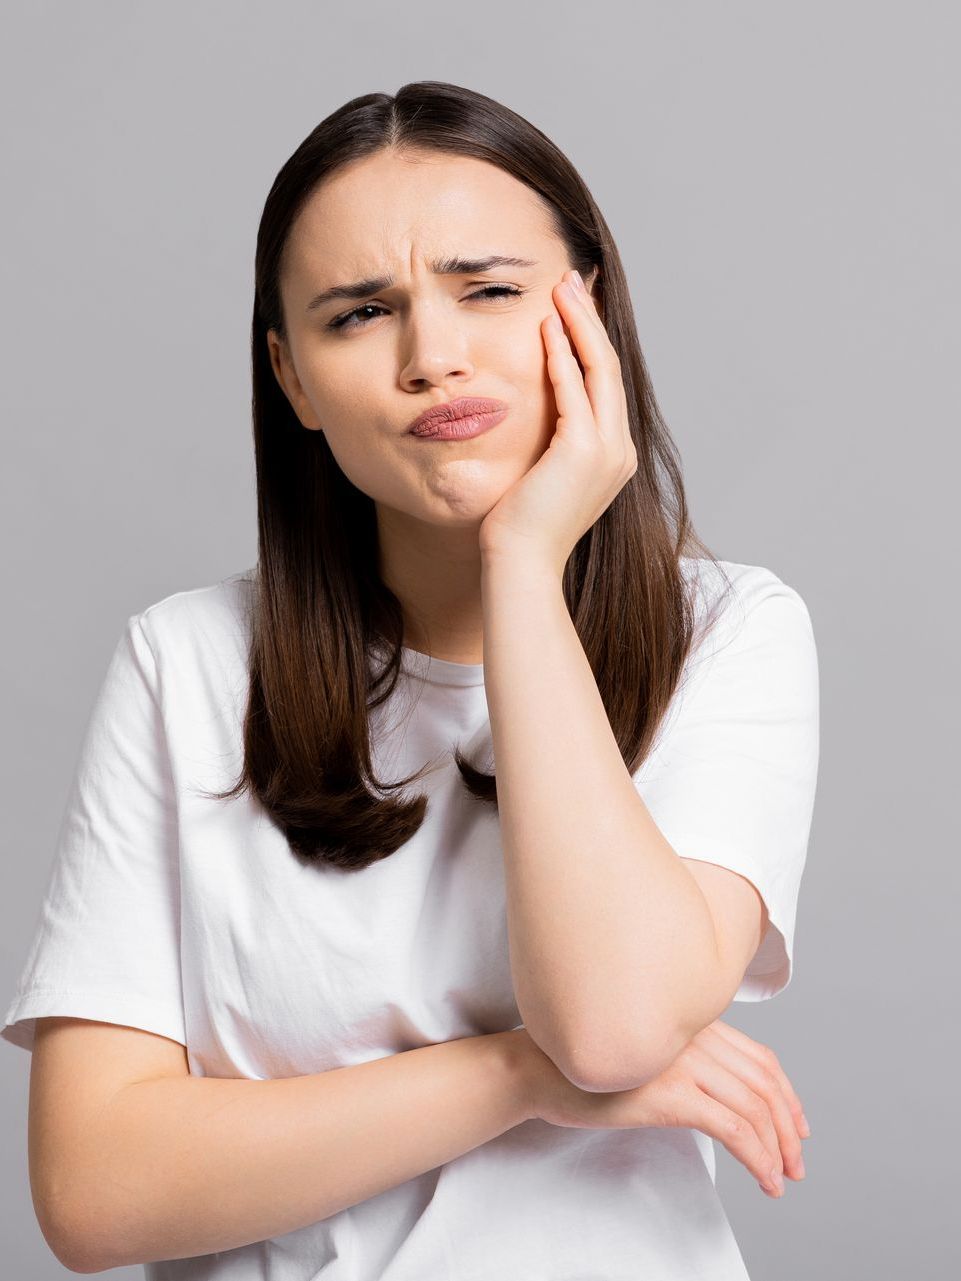 woman in white shirt thinking | Wisdom teeth extractions in Morgantown wv